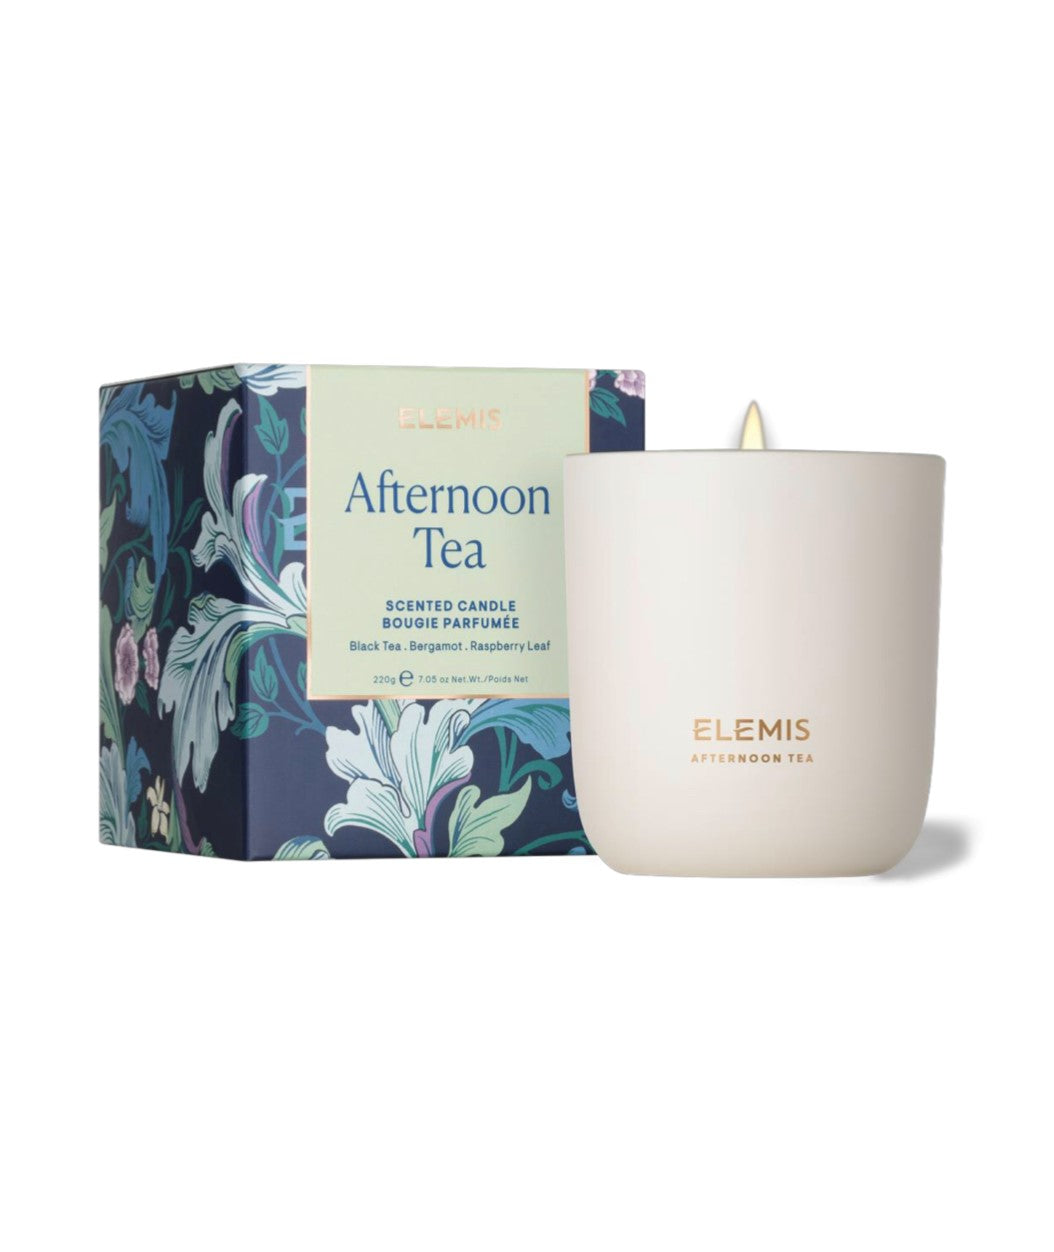 ELEMIS Afternoon Tea Scented Candle